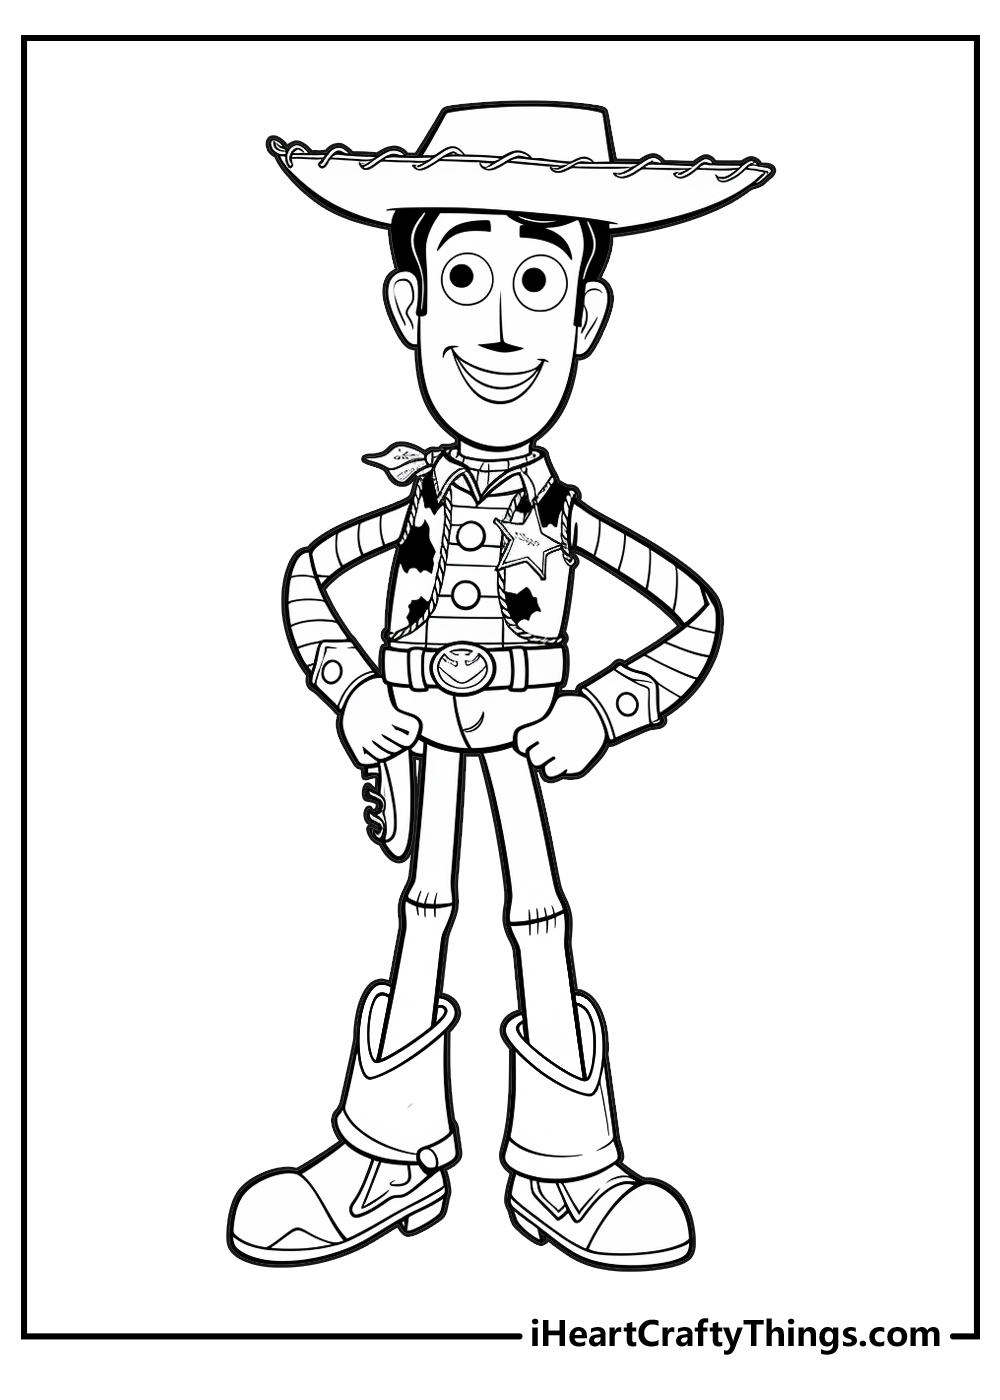 toy story coloring sheet free download